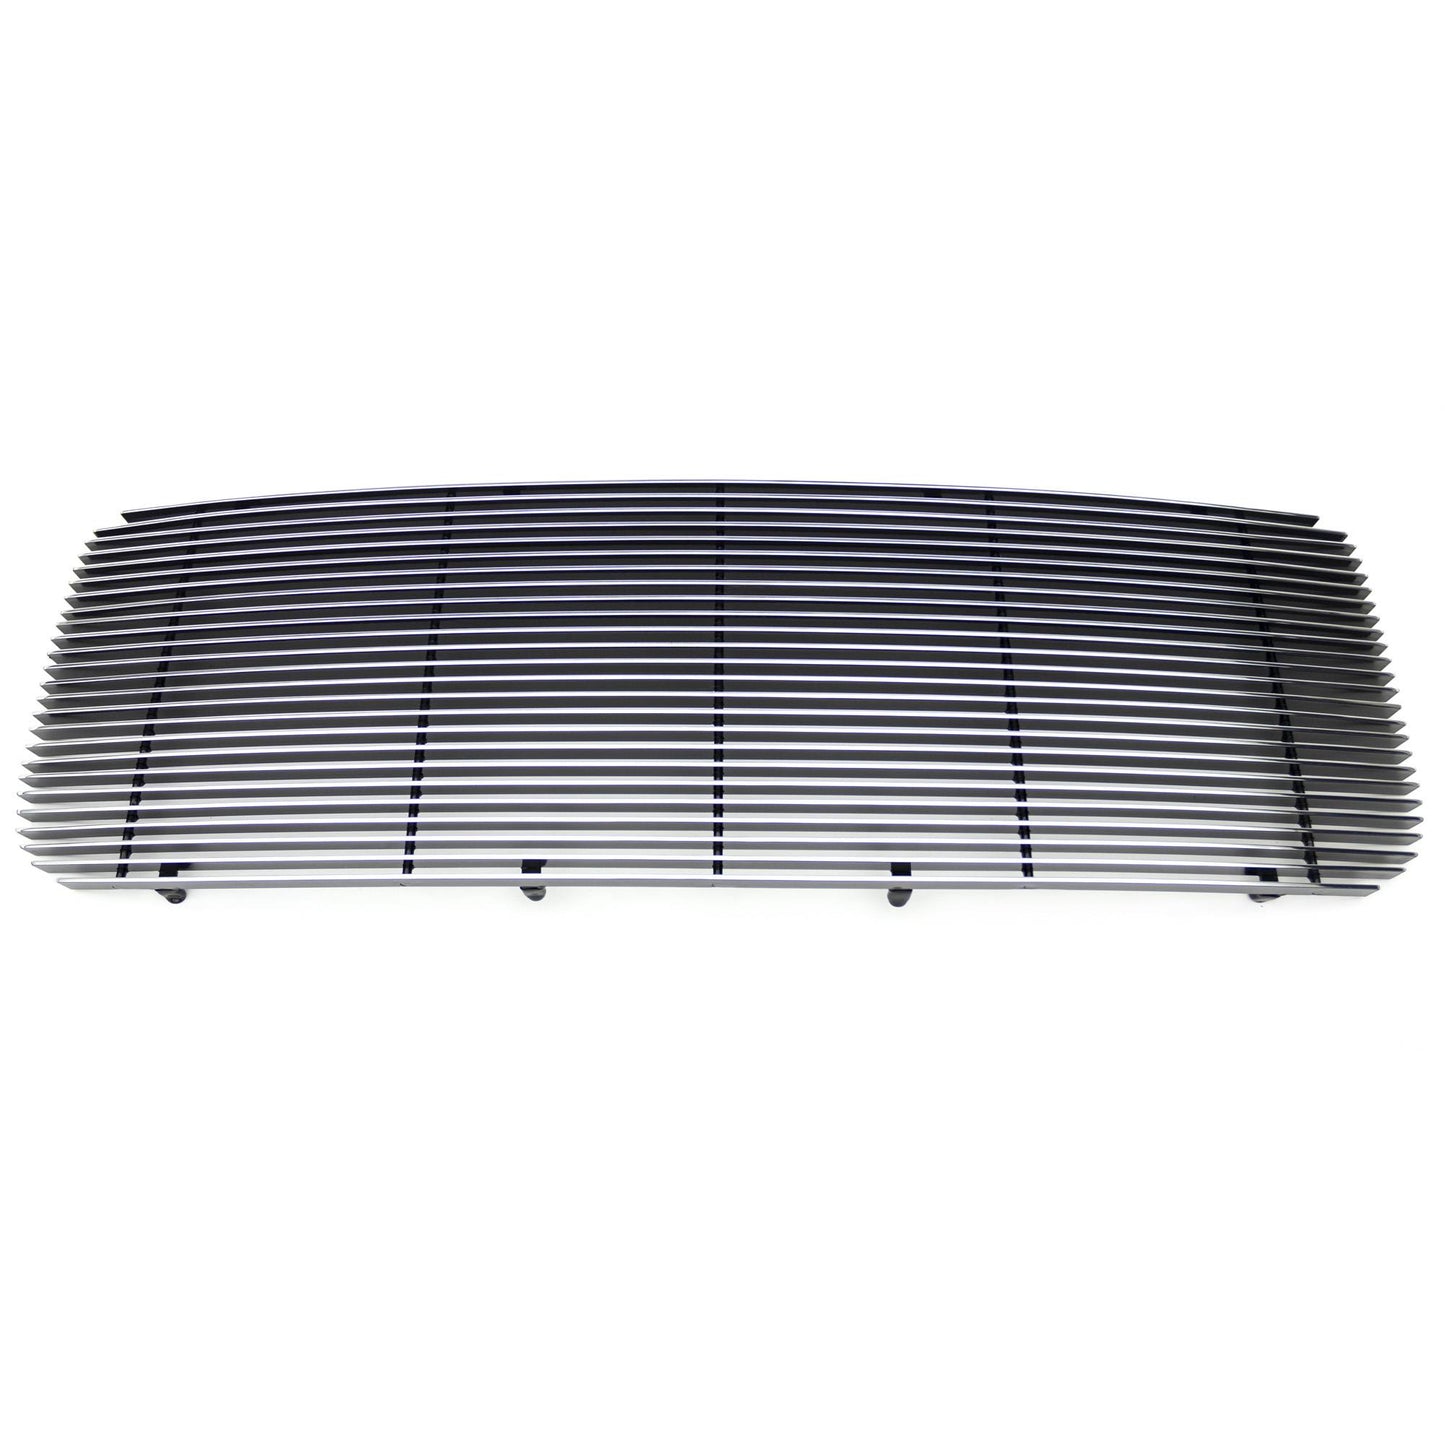 T-REX Grilles 20371 Polished Aluminum Horizontal Grille Fits 2015-2020 GMC Canyon